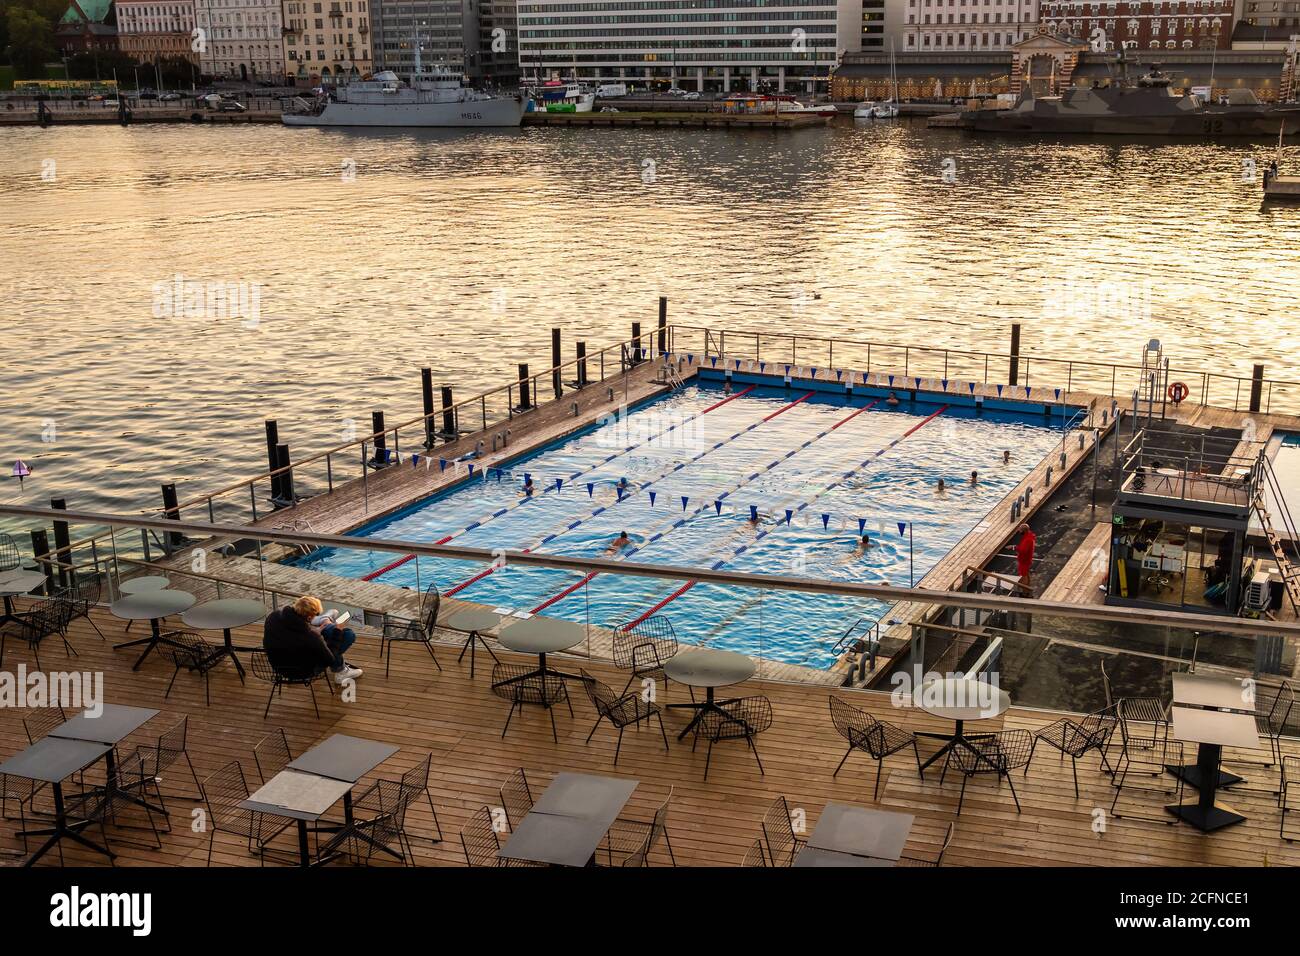 Public pool in Helsinki city at sunset, Finland Stock Photo